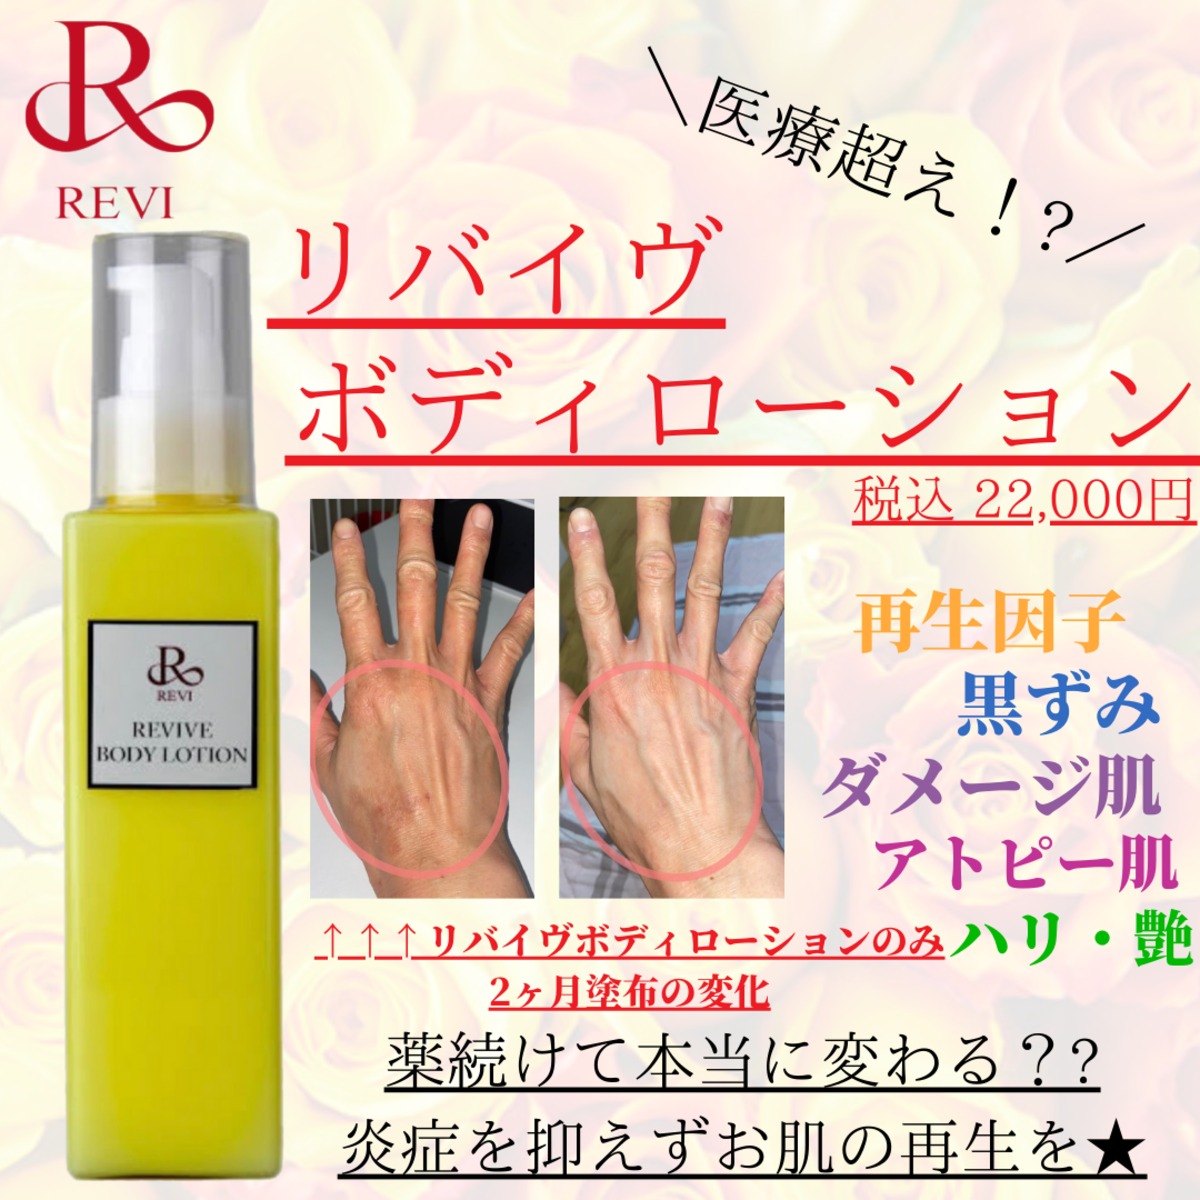 REVIリバイヴボディローション | REVI shop powered by BASE